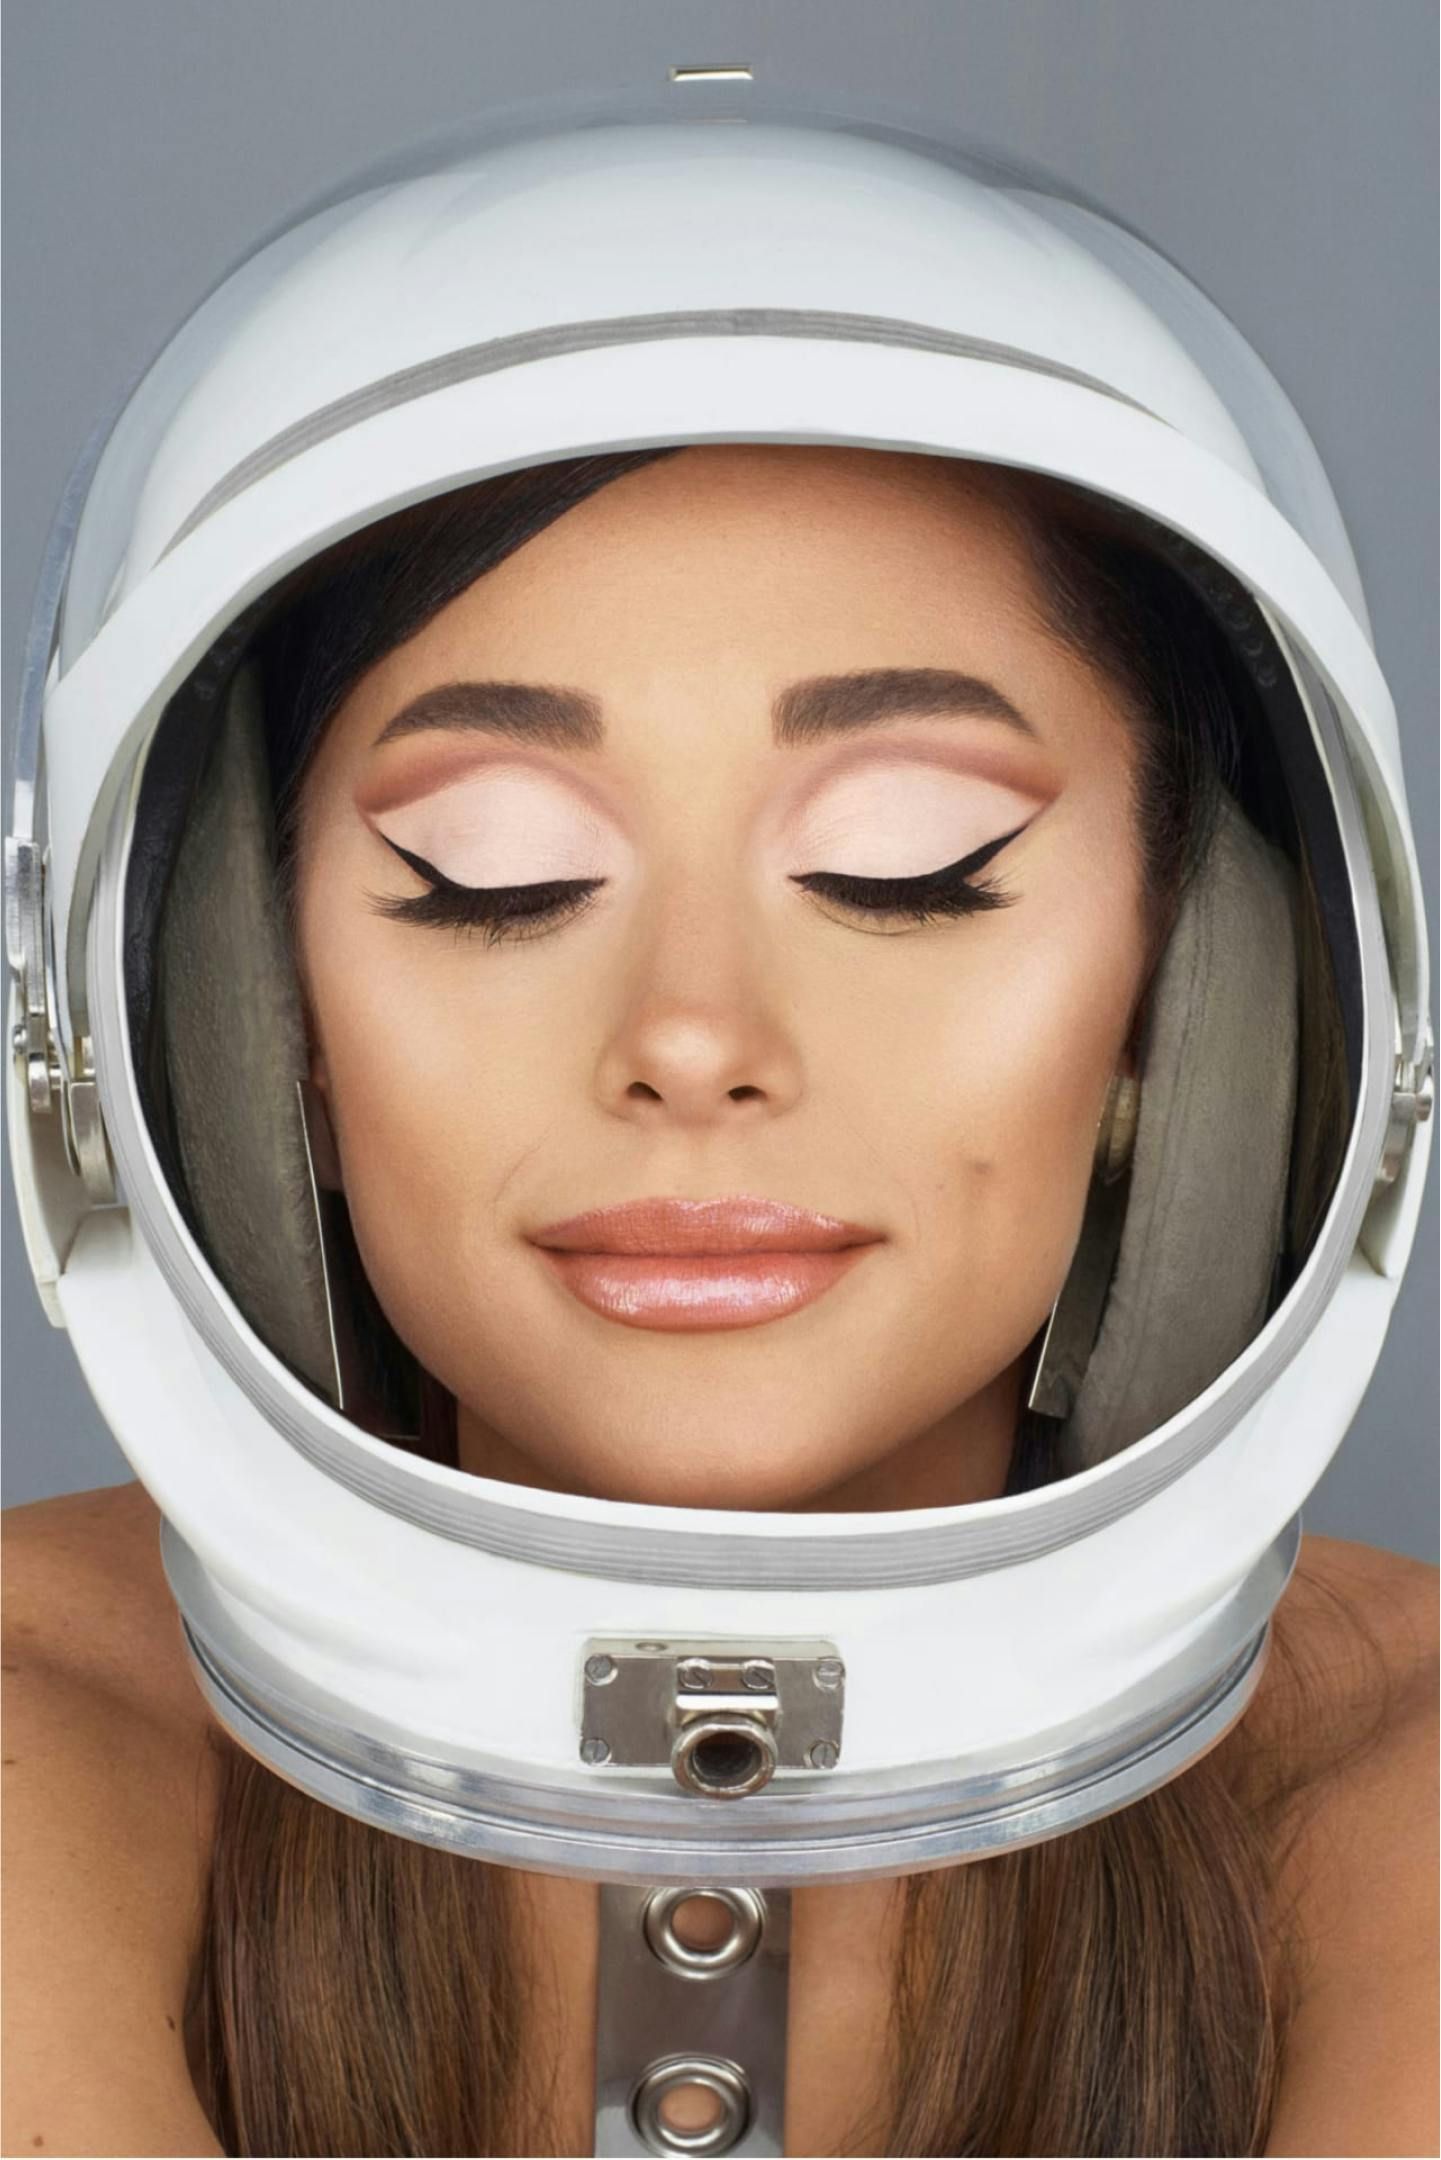 Ariana Grande wearing r.e.m. beauty products and a space helmet